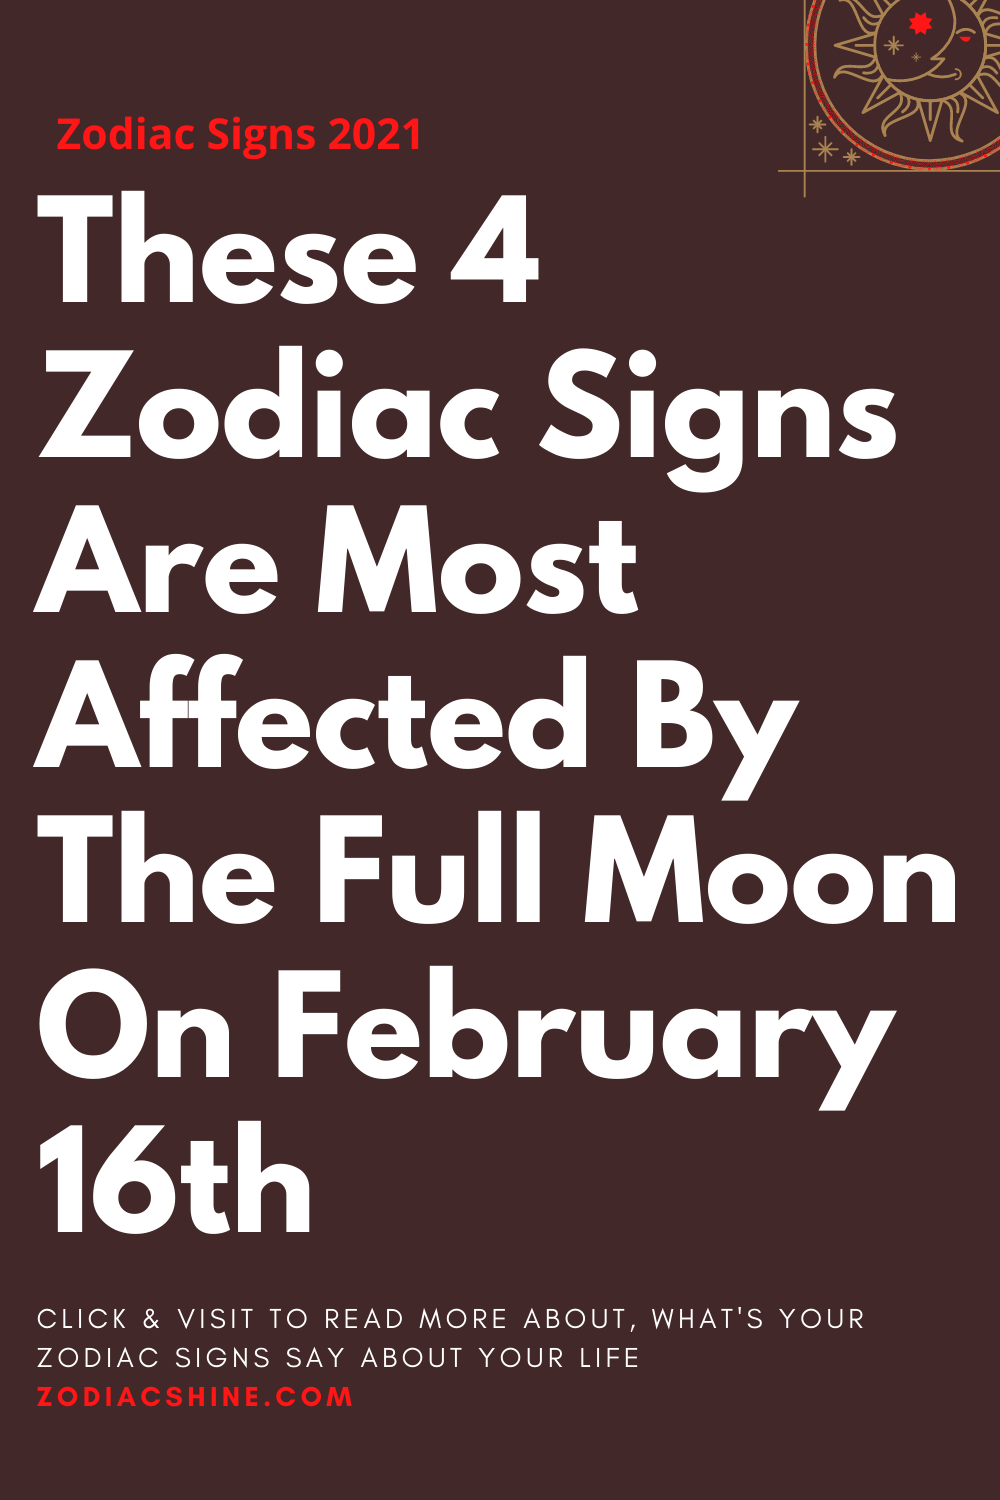 These 4 Zodiac Signs Are Most Affected By The Full Moon On February 16th